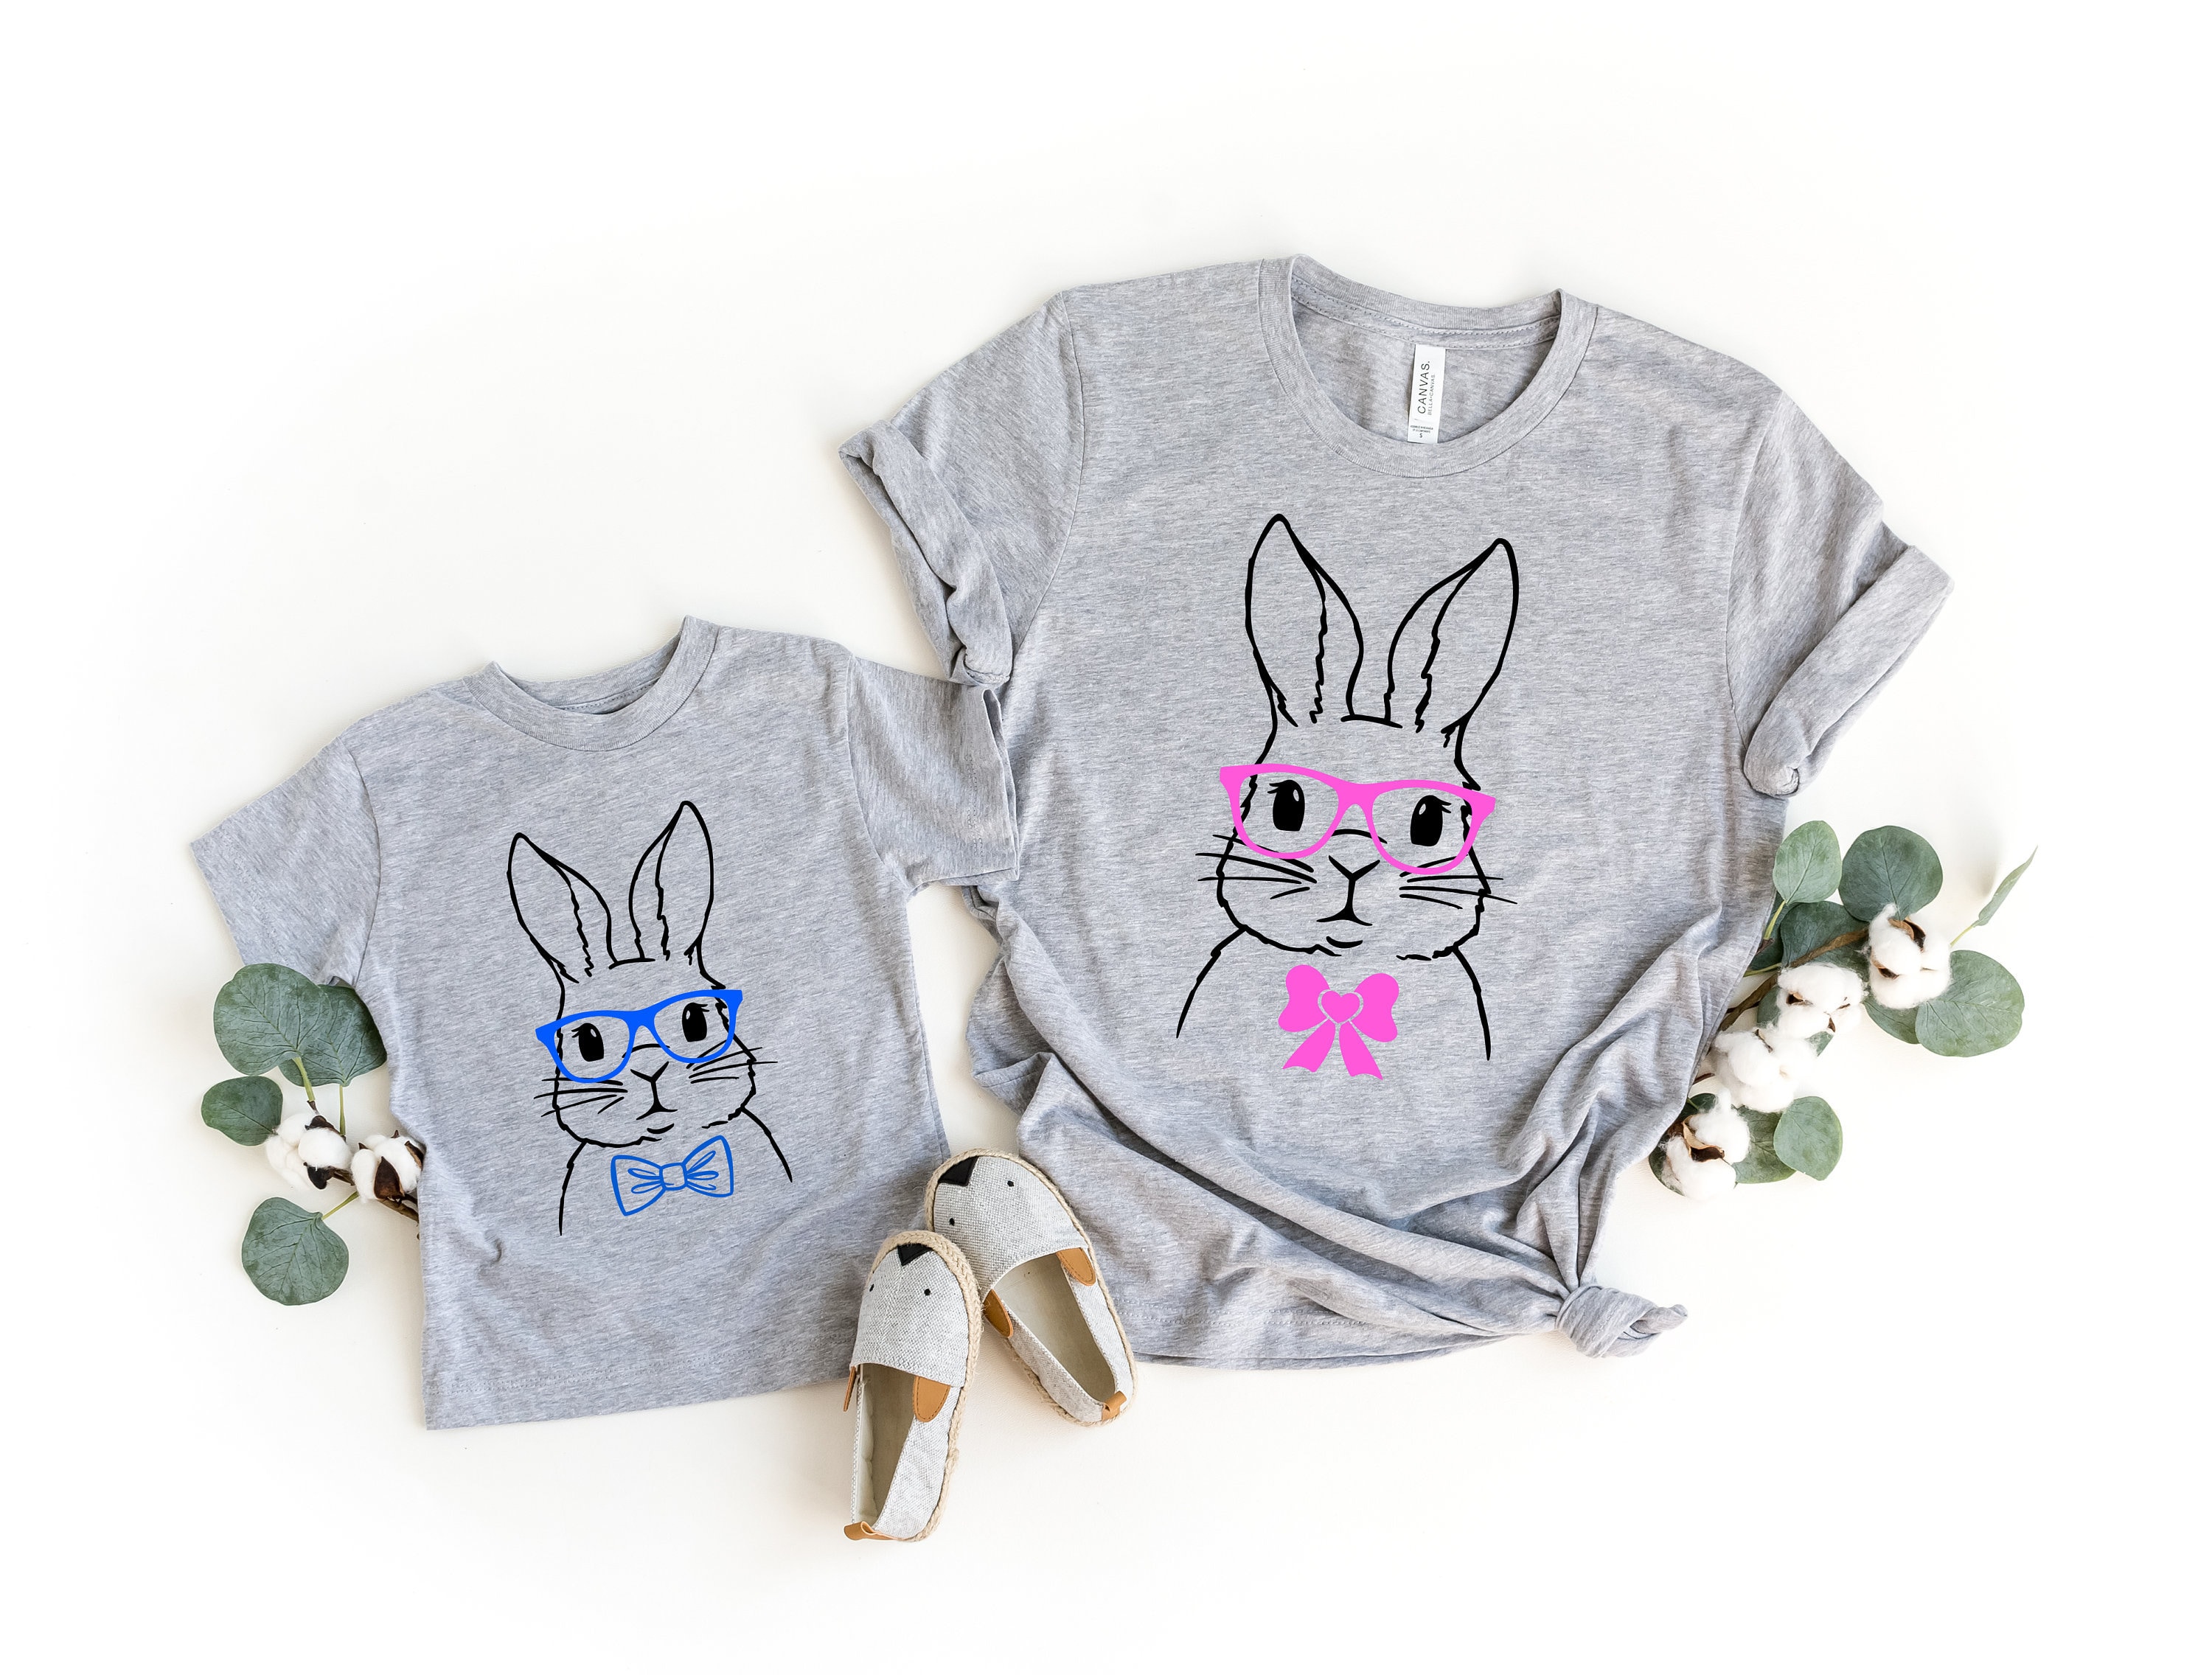 Easter Bunny Shirt Bunny With Glasses Shirt Kids Easter Shirt,Cute Easter Shirt,Easter Day Shirt for Woman Bunny with White Gray